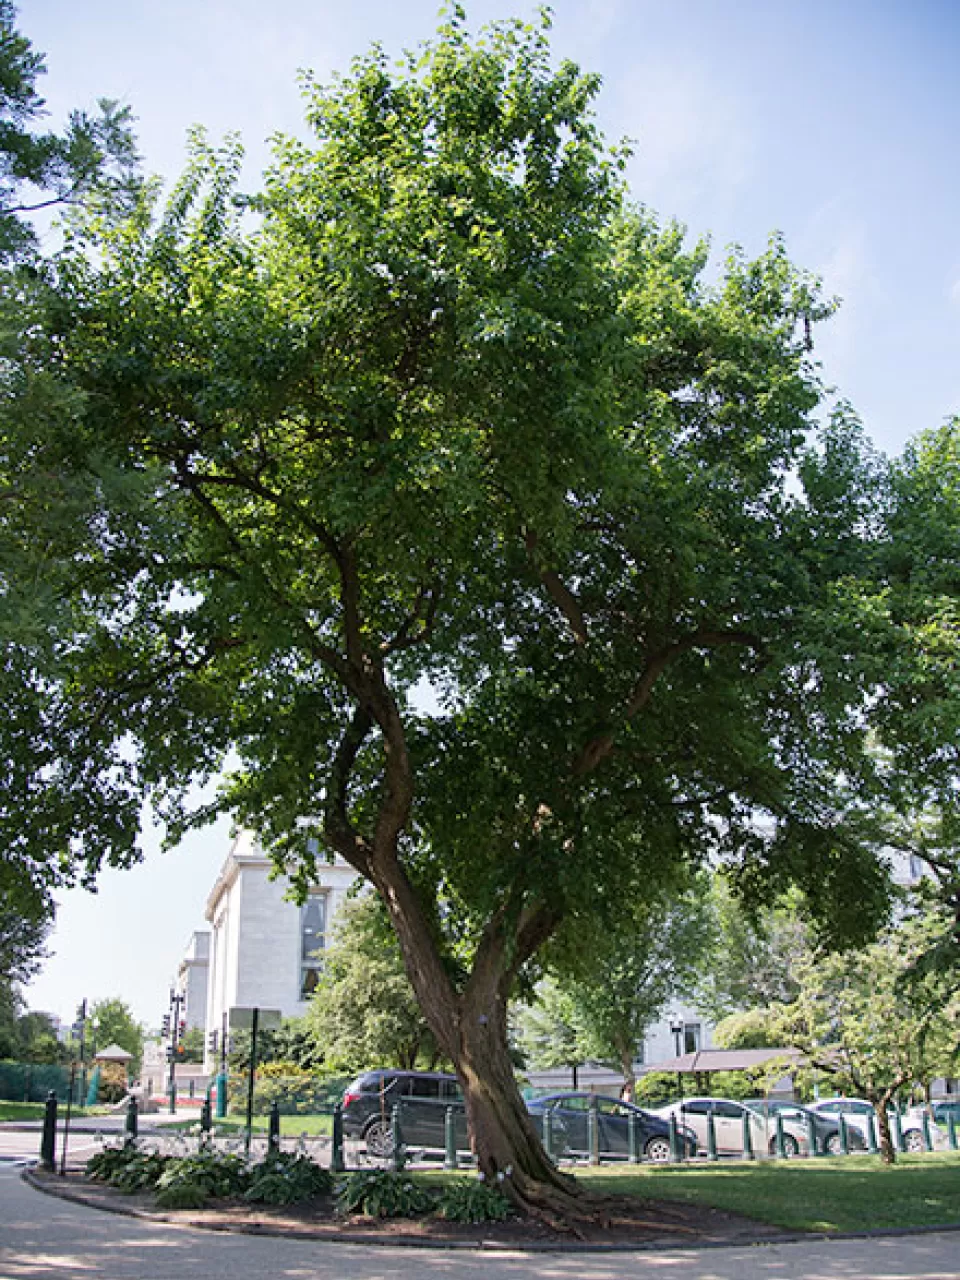 An Osage orange tree on the U.S. Capitol Grounds during the summer.